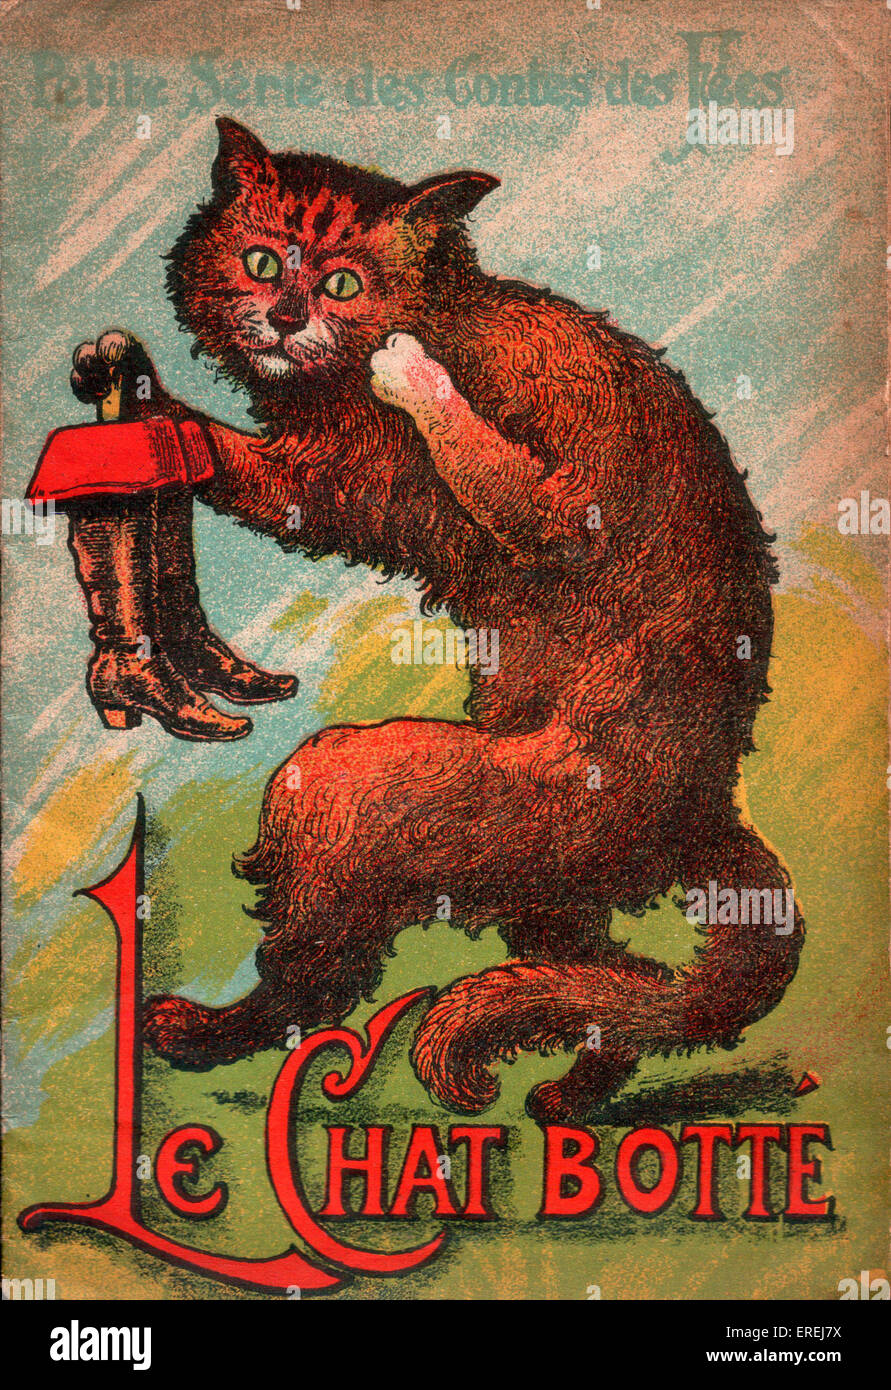 Front cover of French edition of Puss in Boots, c. 1913. Puss is depicted holding the pair of magic boots. Stock Photo